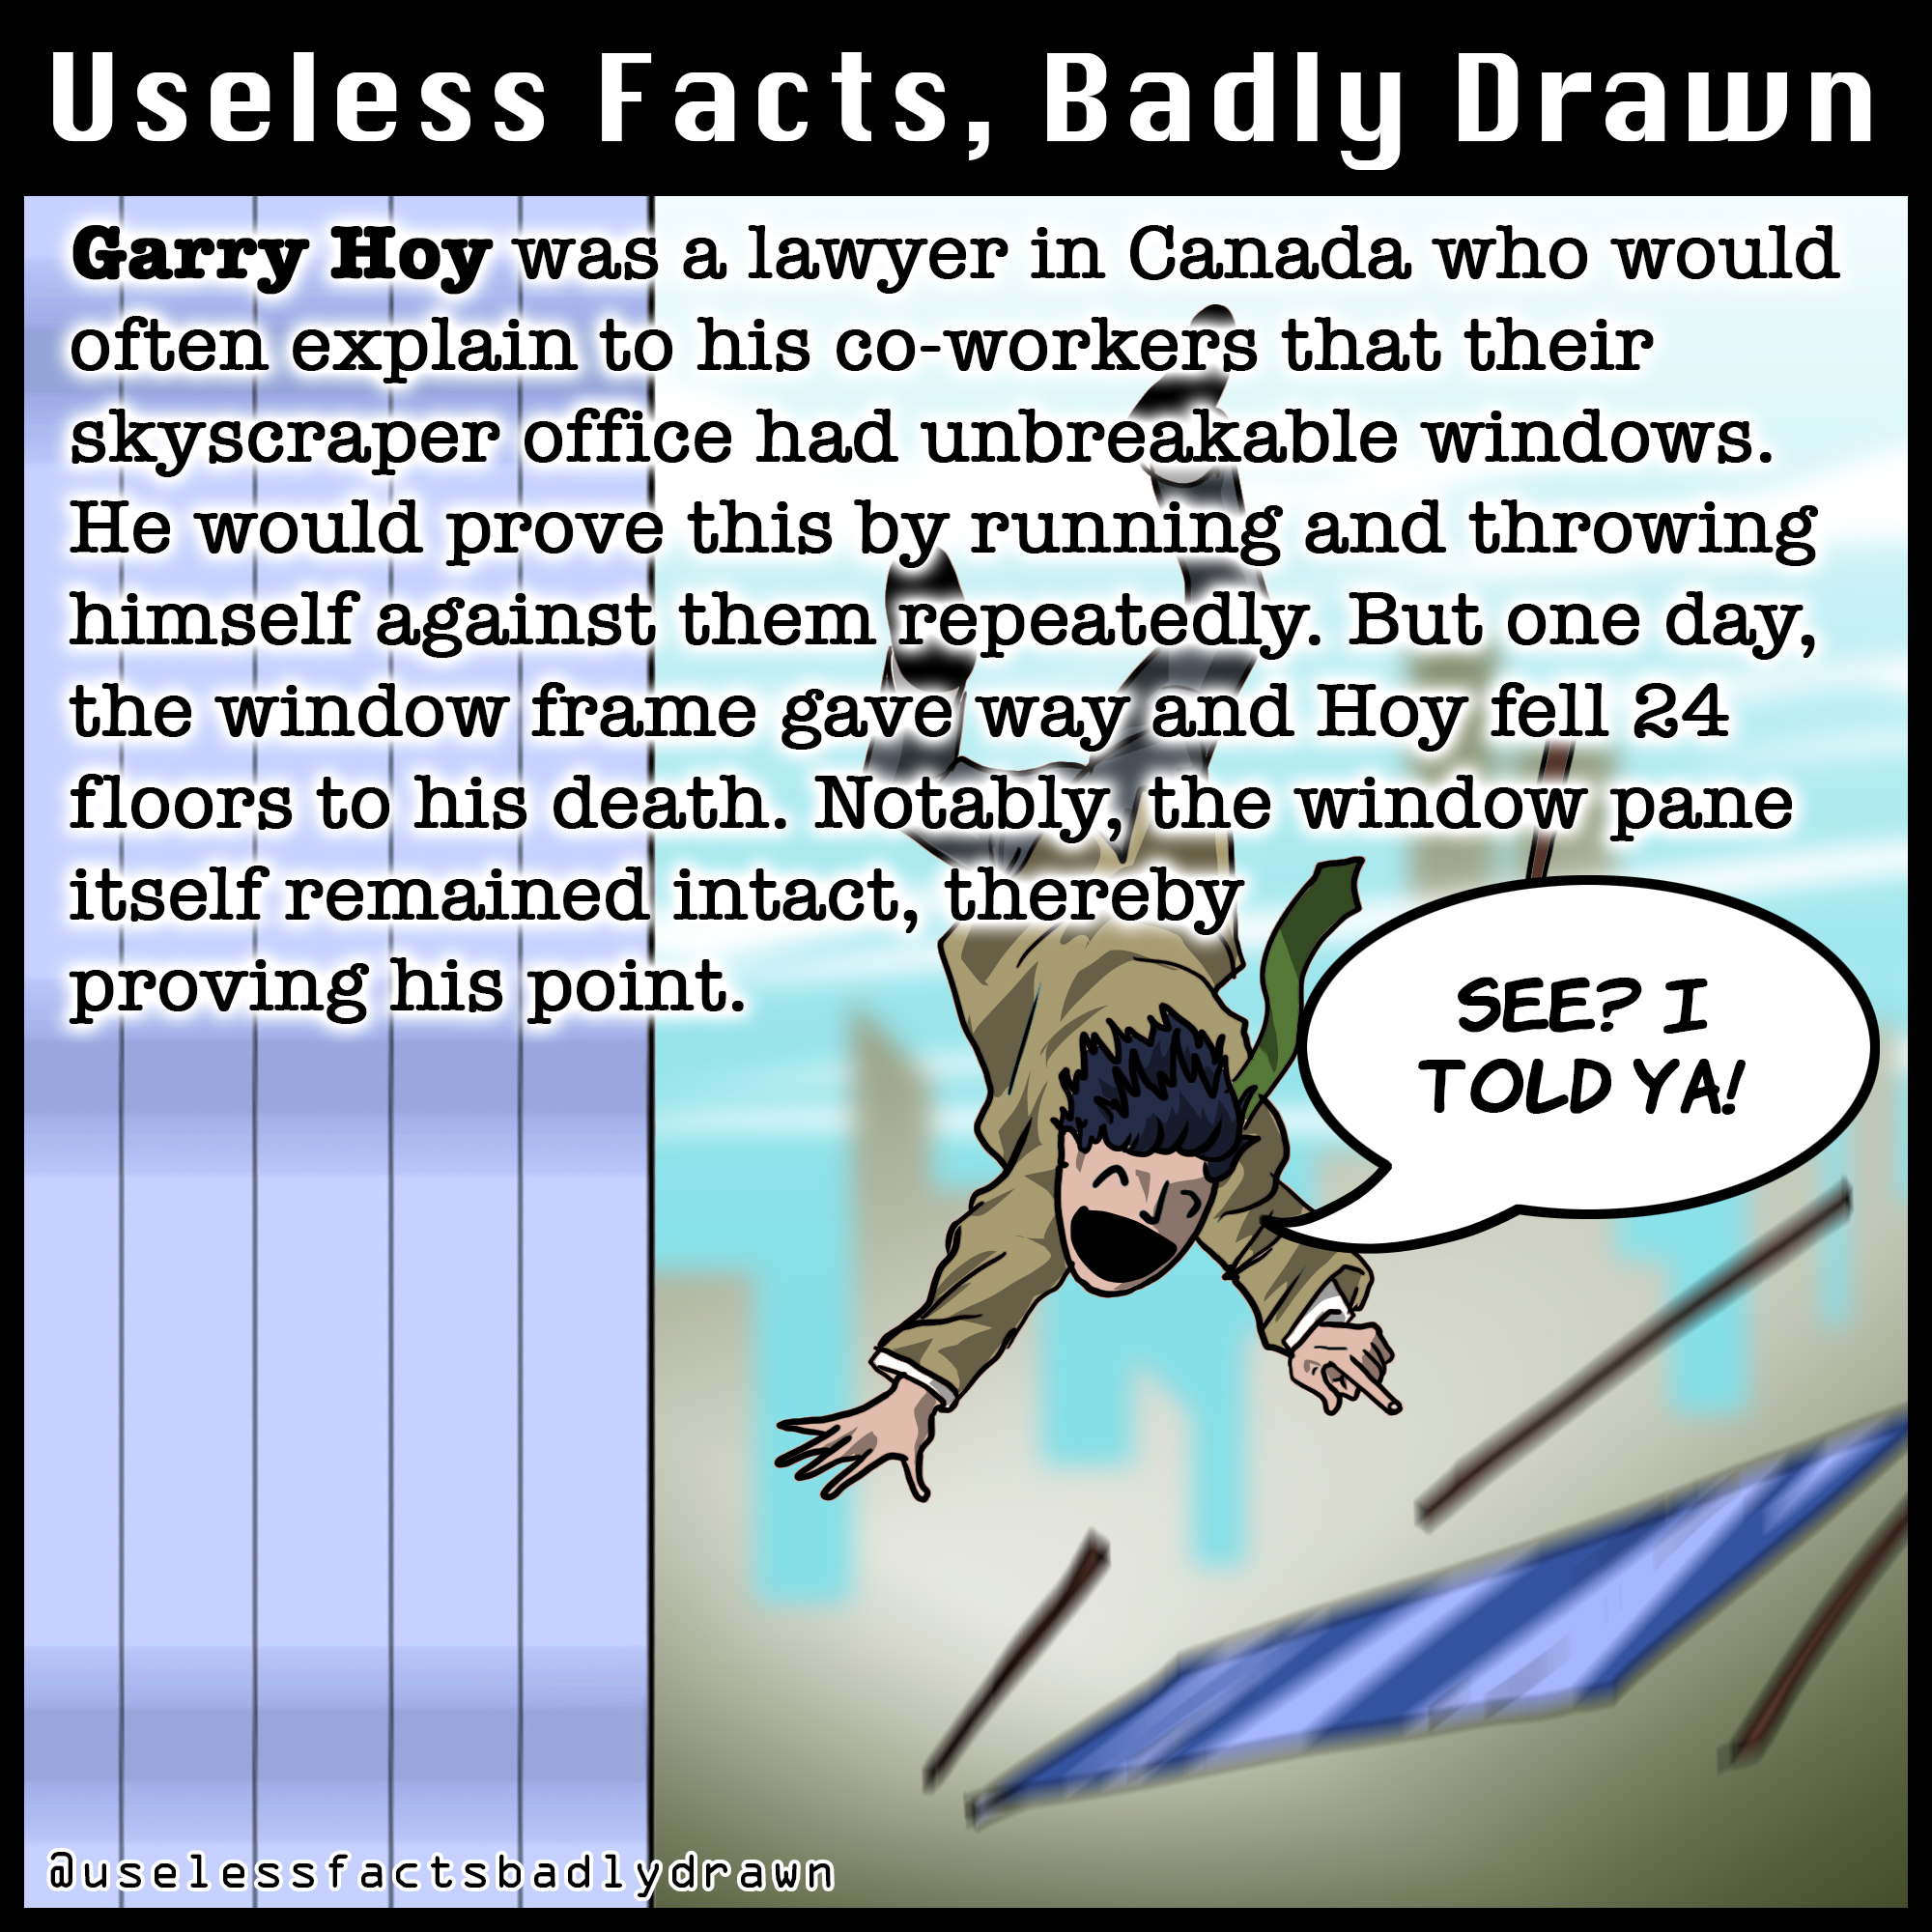 cartoon - Useless Facts, Badly Drawn Garry Hoy was a lawyer in Canada who would often explain to his coworkers that their skyscraper office had unbreakable windows. He would prove this by running and throwing himself against them repeatedly. But one day, 